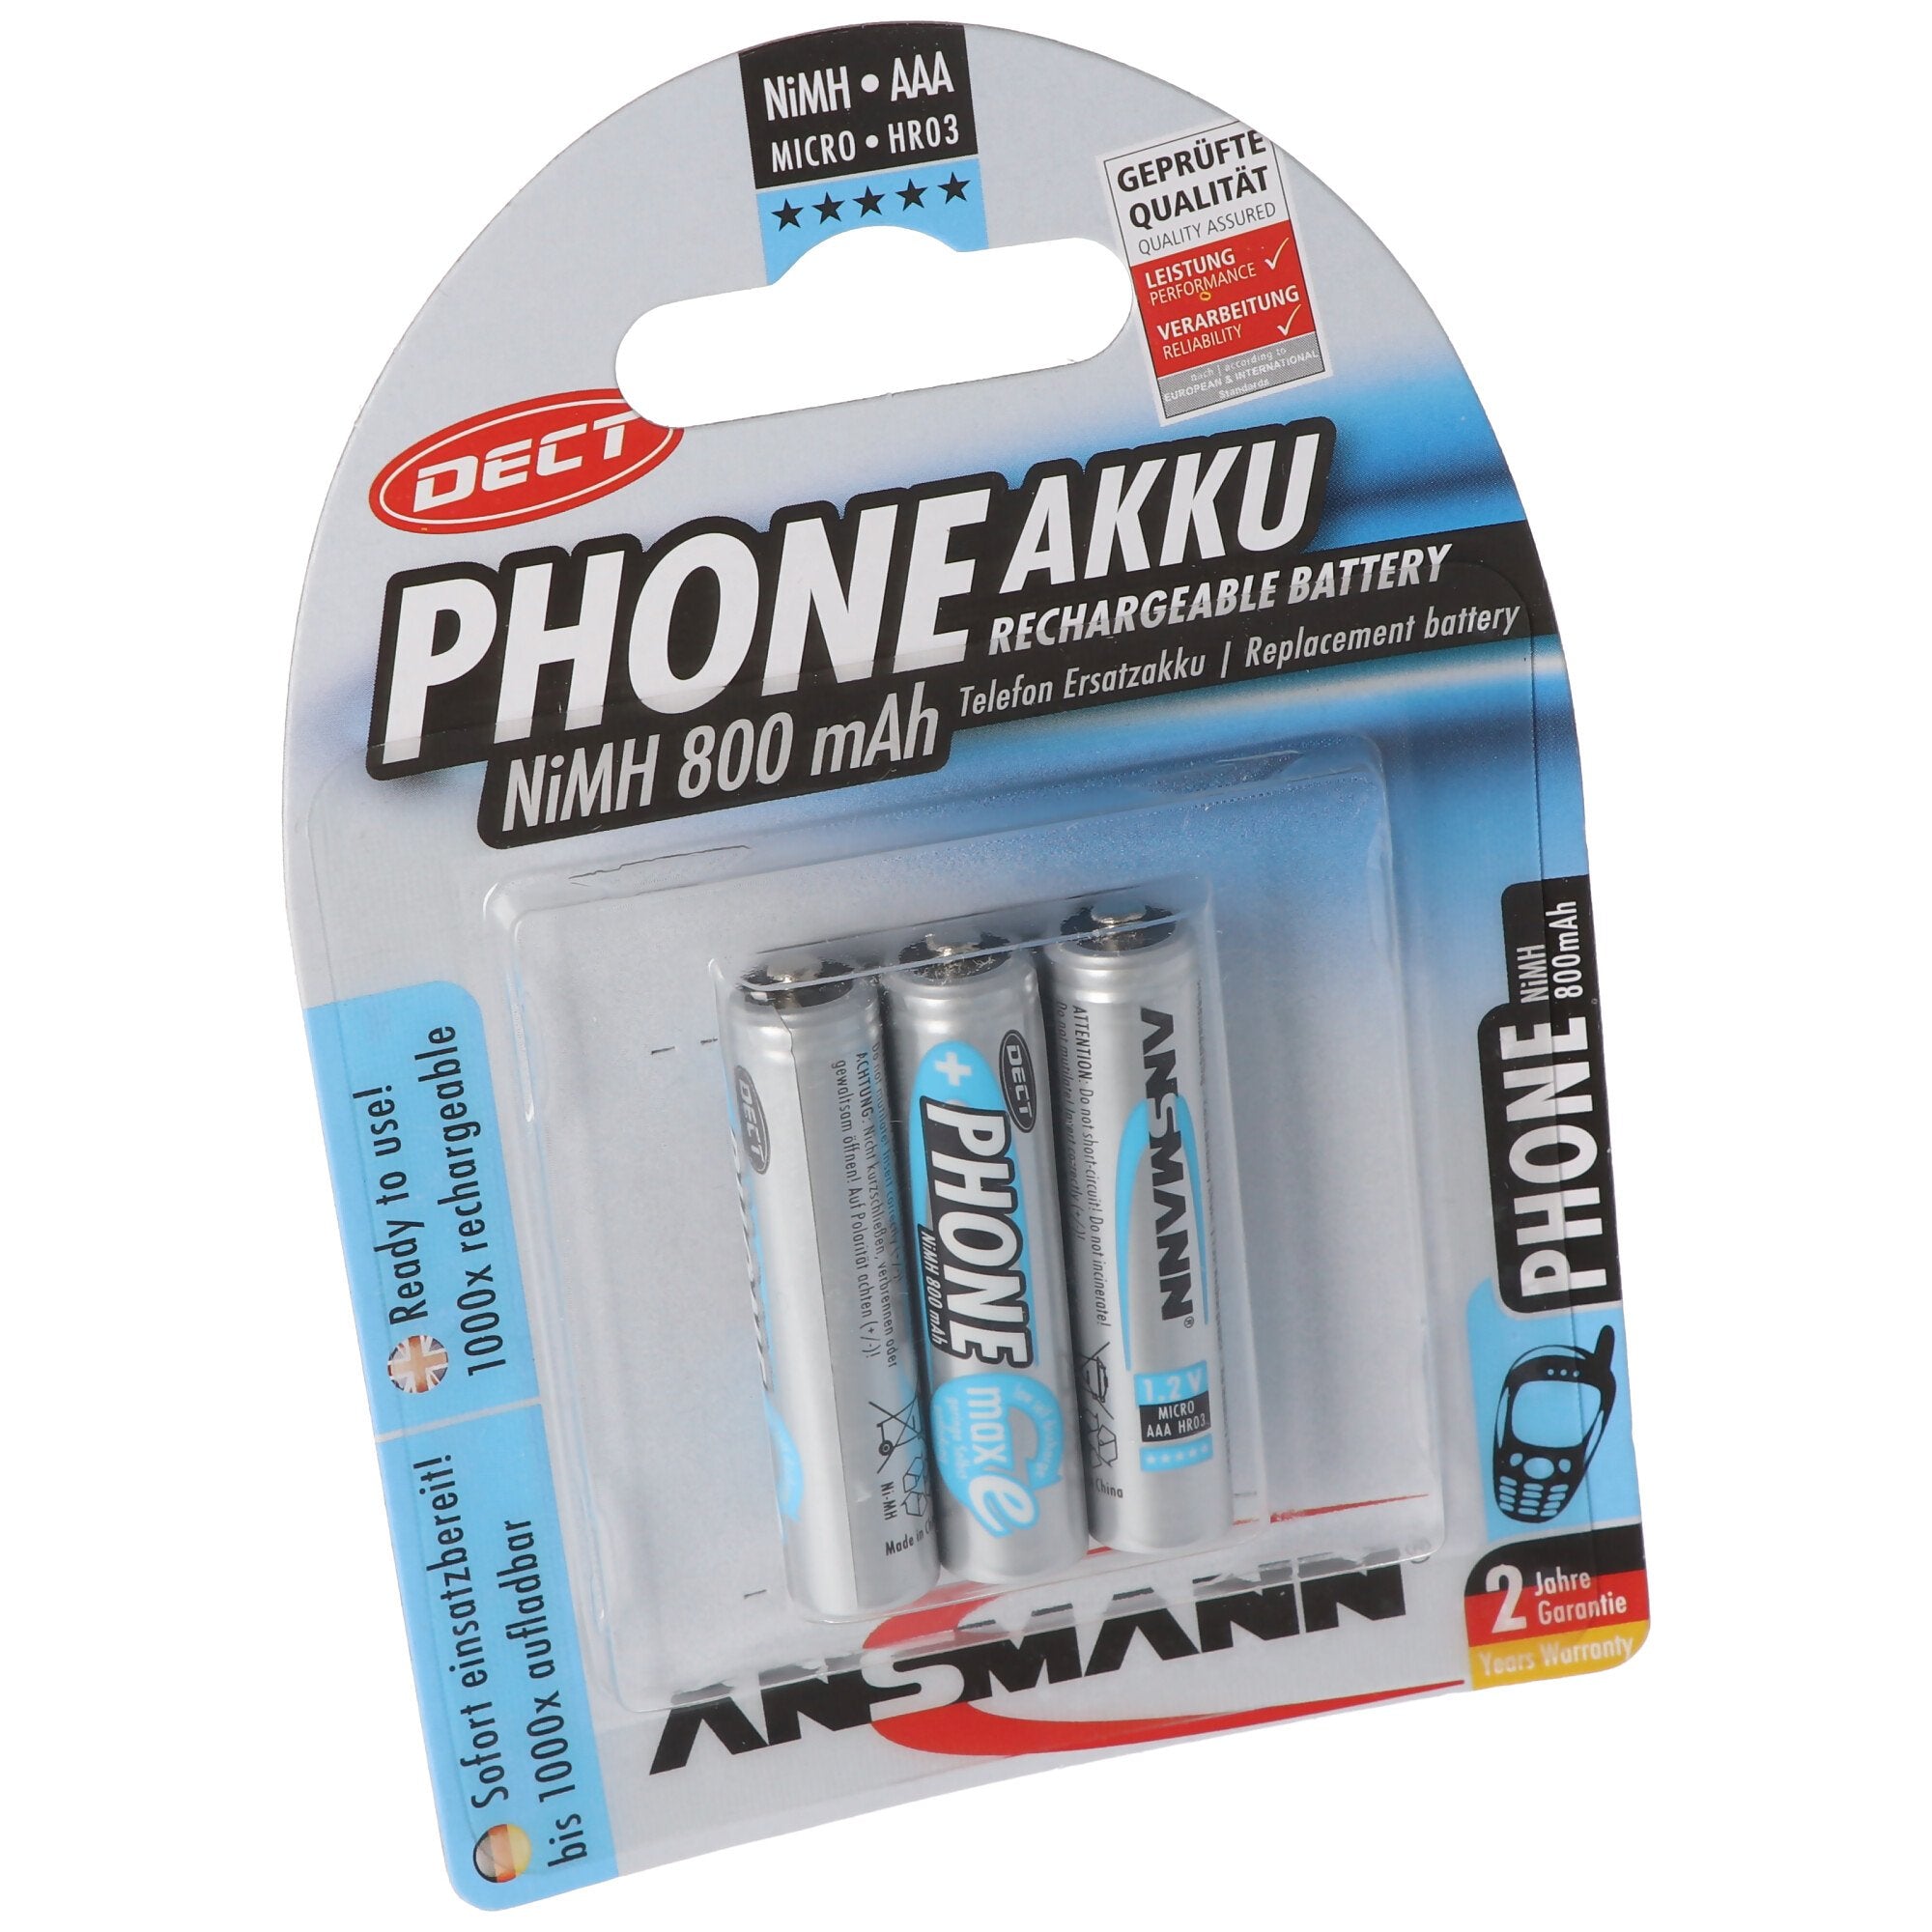 Phone battery AAA NiMH 800mAh ideal for cordless DECT phone